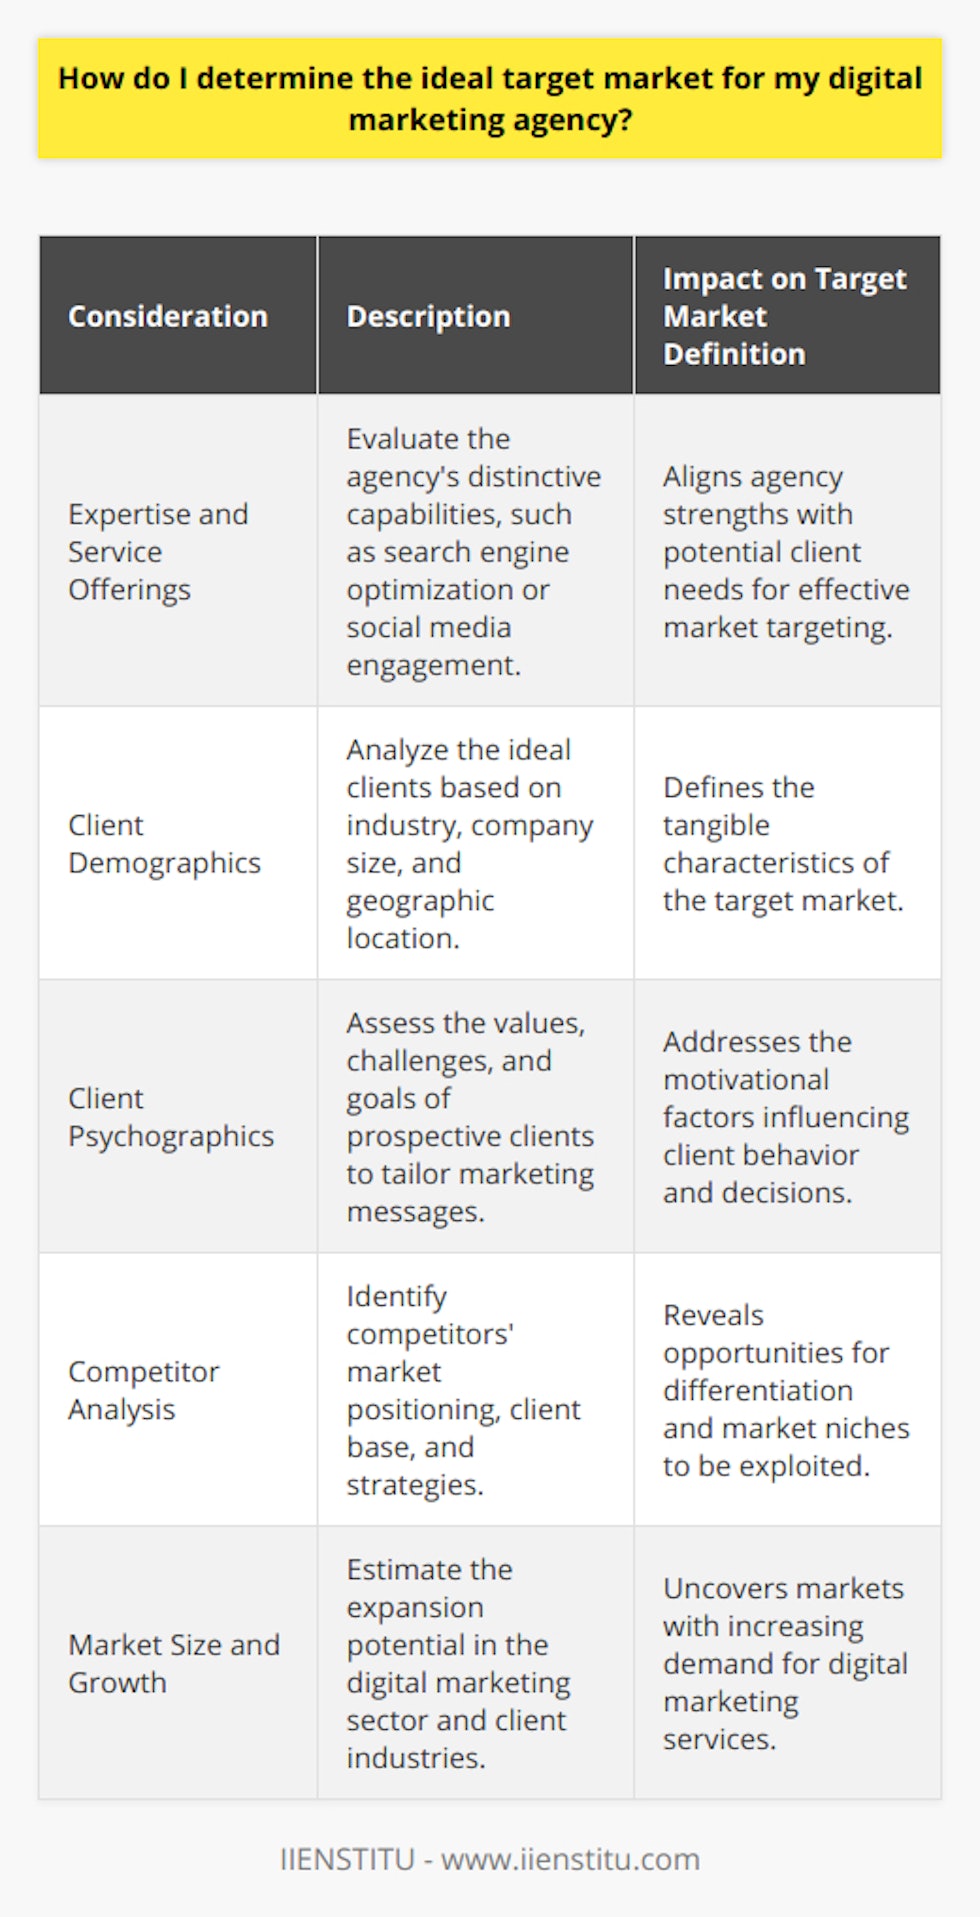 Determining the ideal target market for a digital marketing agency requires a multi-faceted approach that blends expertise awareness, demographic and psychographic assessments, competitor analysis, and an understanding of market size and growth potential. Here's how to navigate these crucial considerations.Expertise and Service Offerings:Grasping what your digital marketing agency excels at is fundamental in pinpointing your ideal market. Evaluate your primary strengths—are you particularly skilled at boosting organic search results, or maybe crafting impactful social media campaigns? By understanding your agency's unique service propositions, you can more effectively match your offerings with the needs of potential clients within various industries or niches.Client Demographics:One of the ways to delineate the target market is to analyze the demographics of your ideal clients. What are the industries, company sizes, and locations you aim to serve? For instance, if your services are geared towards high-end luxury brands, your demographic focus might be affluent regions and clients with the corresponding income levels.Client Psychographics:While demographics sketch out the who of your target market, psychographics draw the why. Identifying the values, pain points, and aspirations of your prospective clients will allow you to craft resonant messages that appeal directly to their needs and motivations. An agency that understands these subtler nuances stands out in delivering a personalized and impactful digital marketing experience.Competitor Analysis:It's crucial to gain insights into who your competitors are and what they offer. This may reveal gaps in the market that your agency can capitalize on. Evaluate how competitors position themselves, the nature of their client base, and the strategies they employ. These insights will help you customize your services to fill unmet needs, differentiating your agency from the competition.Market Size and Growth:Finally, it's important to assess the market's size and the potential for growth, both for the digital marketing sector and the industries of potential clients. Determine which markets are expanding and could benefit most from digital marketing services. A growing market signifies a rising need for the sophisticated digital presence that your agency could provide, which in turn translates into viable, long-term clientele.By integrating a deep understanding of your agency's capabilities with a strategic analysis of market demographics, psychographics, competition, and potential for growth, you can accurately define your ideal target market. This balance between internal capabilities and external opportunities is key to successful client engagements and long-term sustainability in the dynamic field of digital marketing.